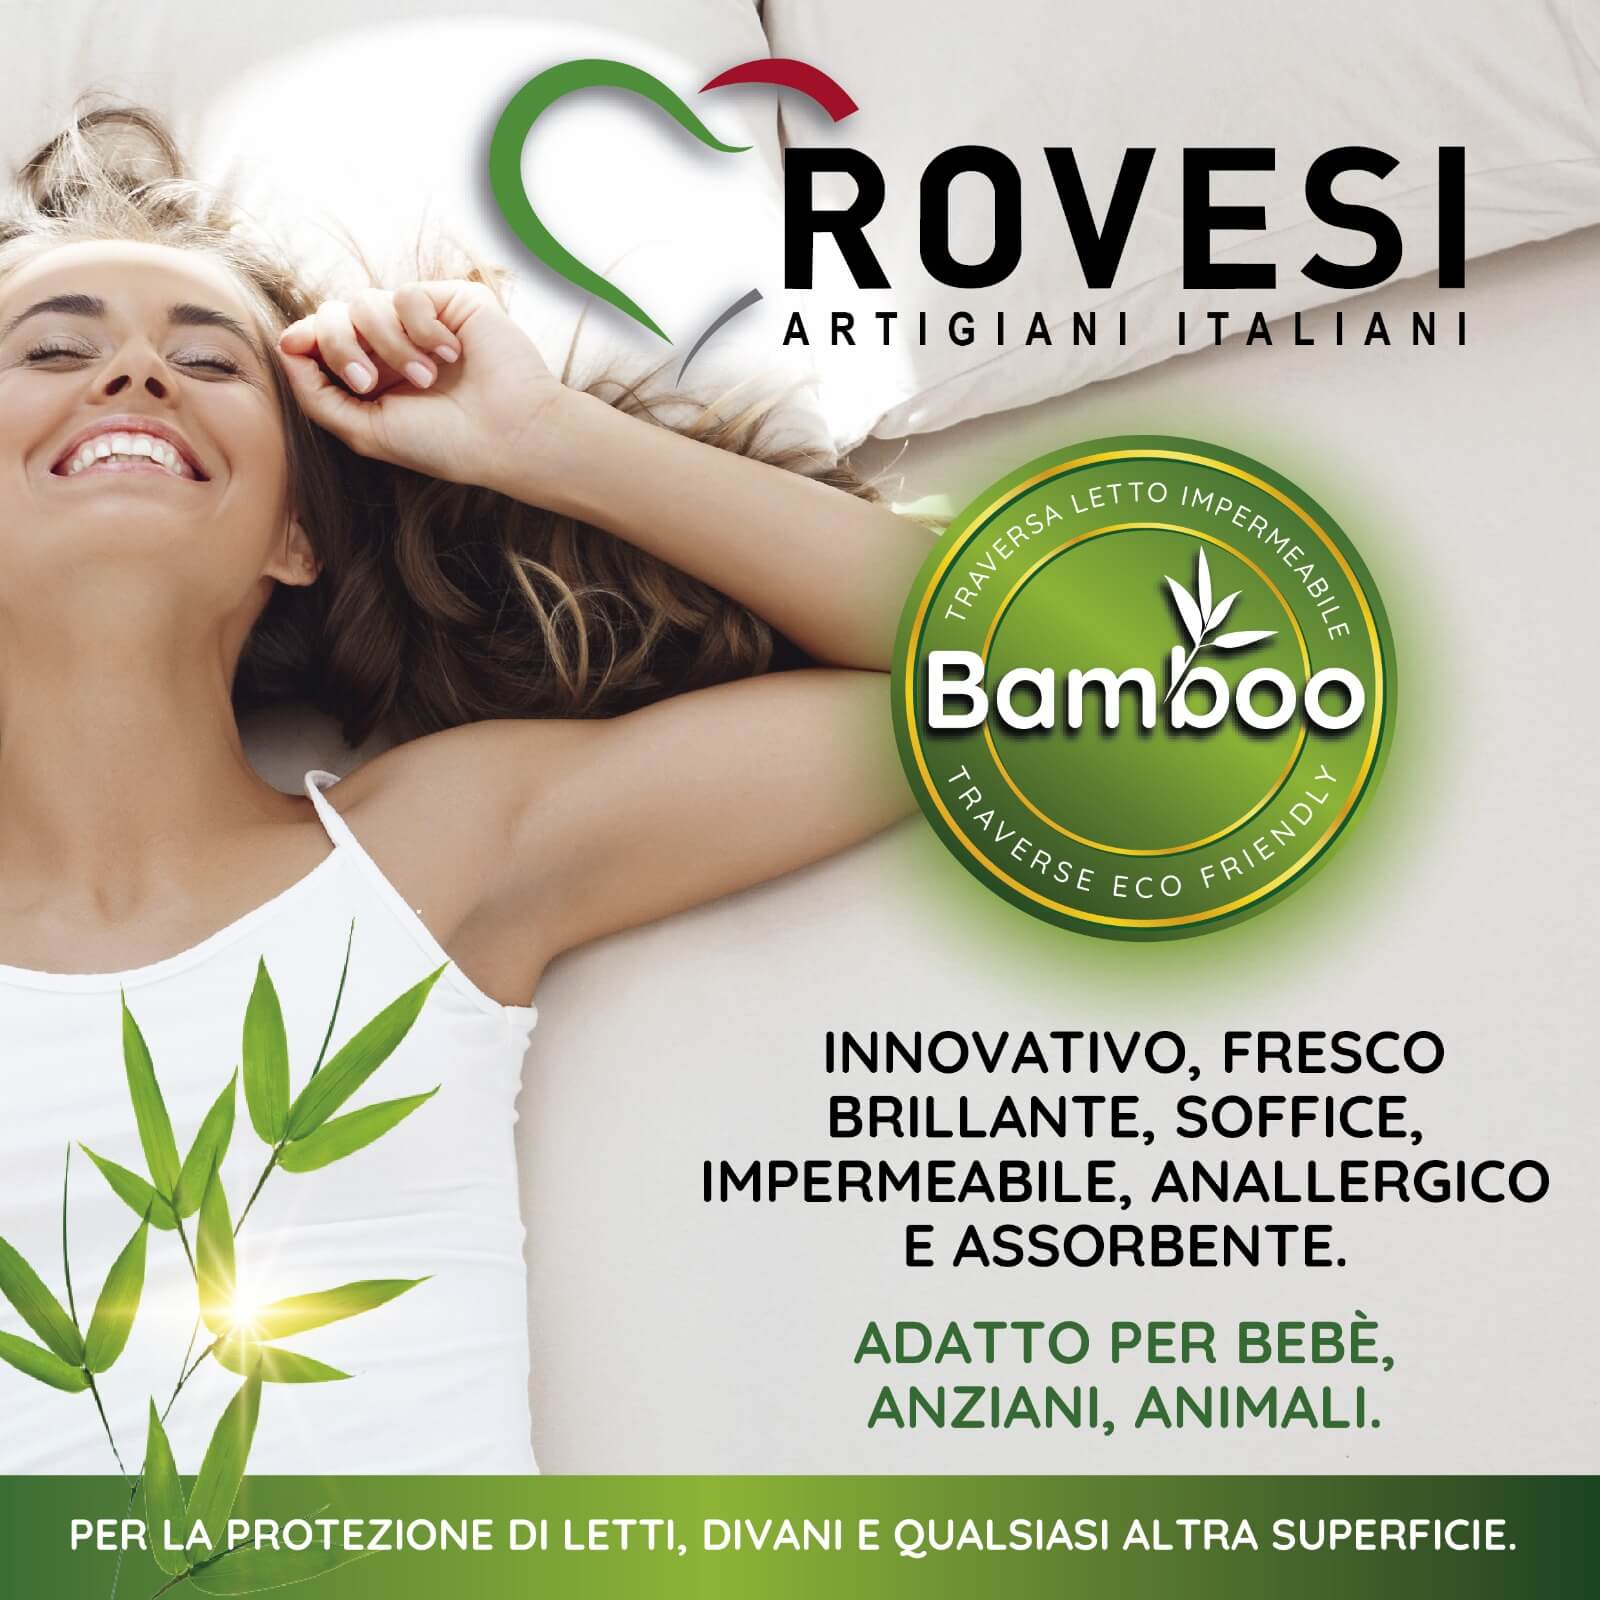 ROVESI BAMBOO CROSSPIECES washable, waterproof, absorbent. Double